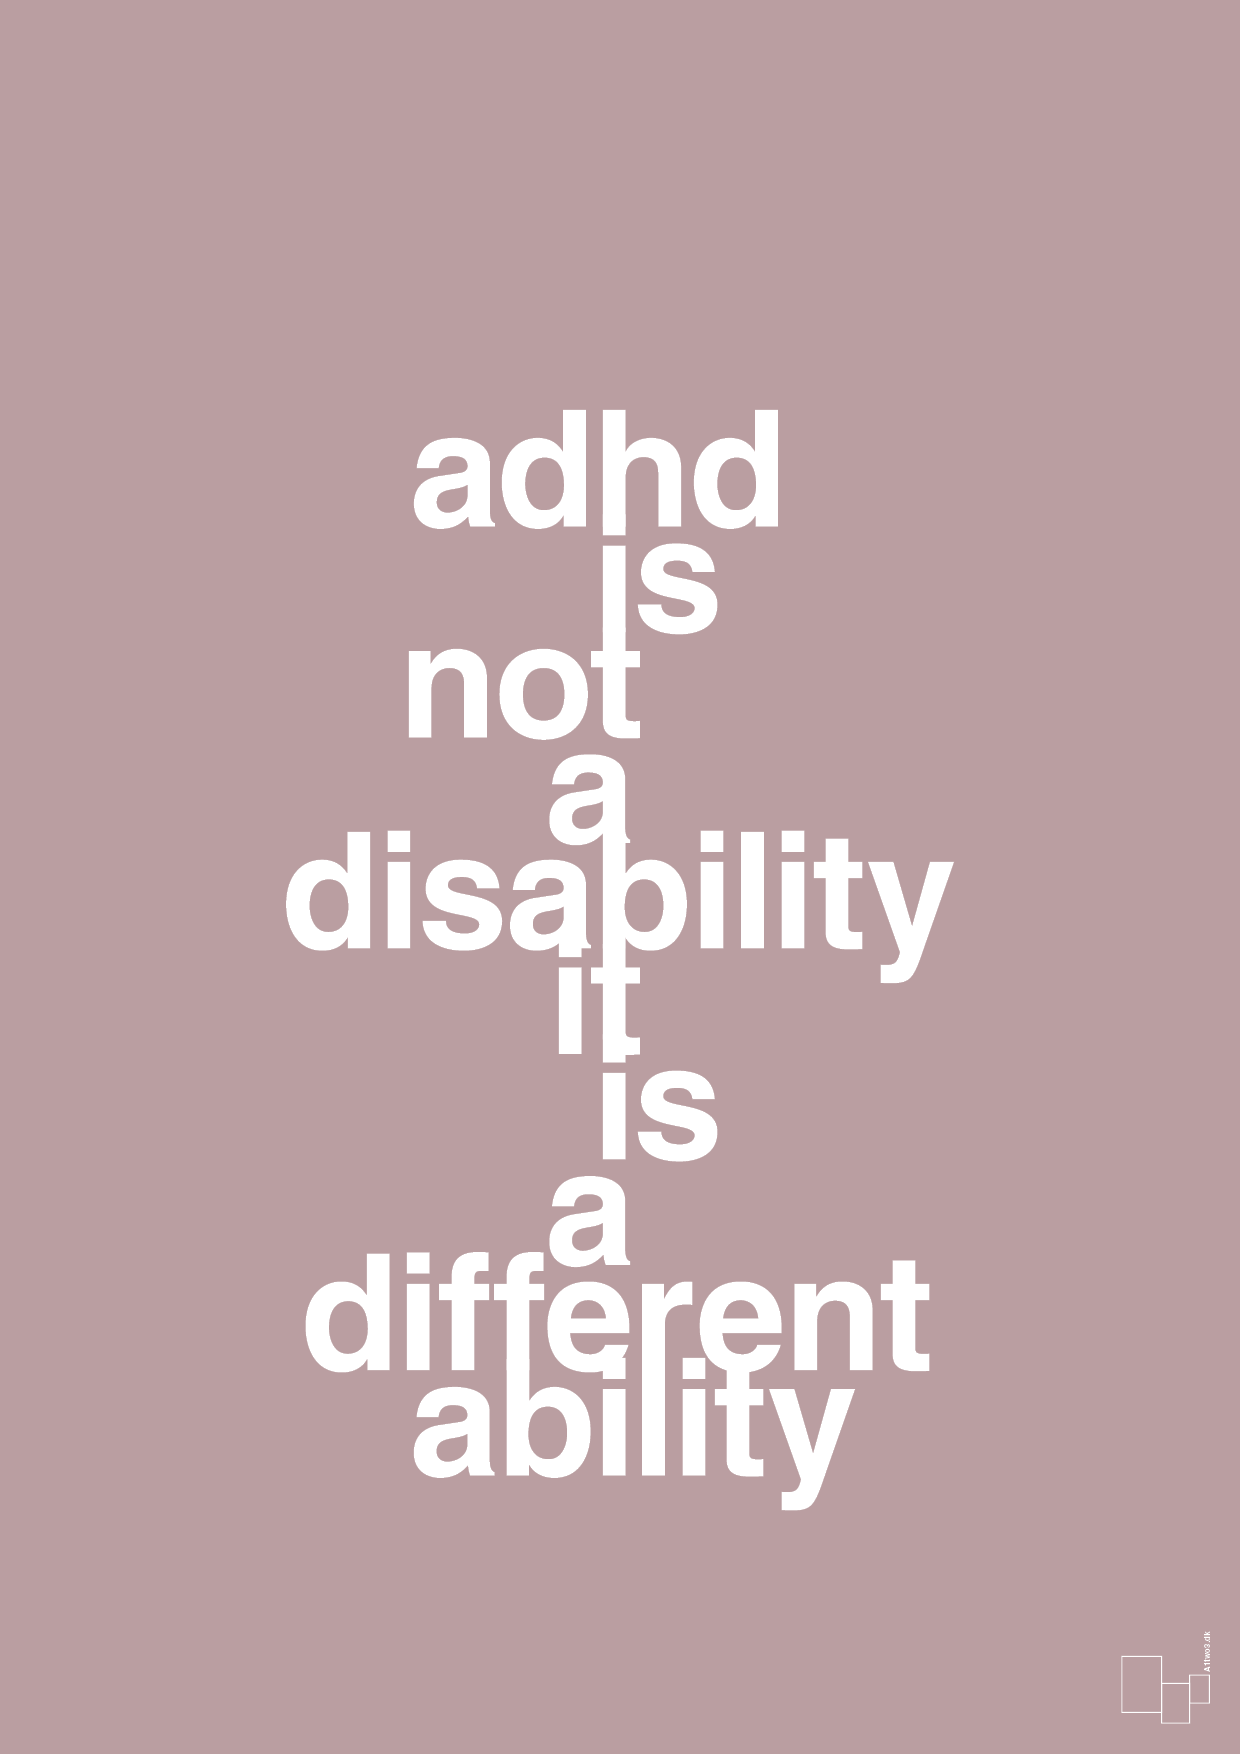 adhd is not a disability it is a different ability - Plakat med Samfund i Light Rose